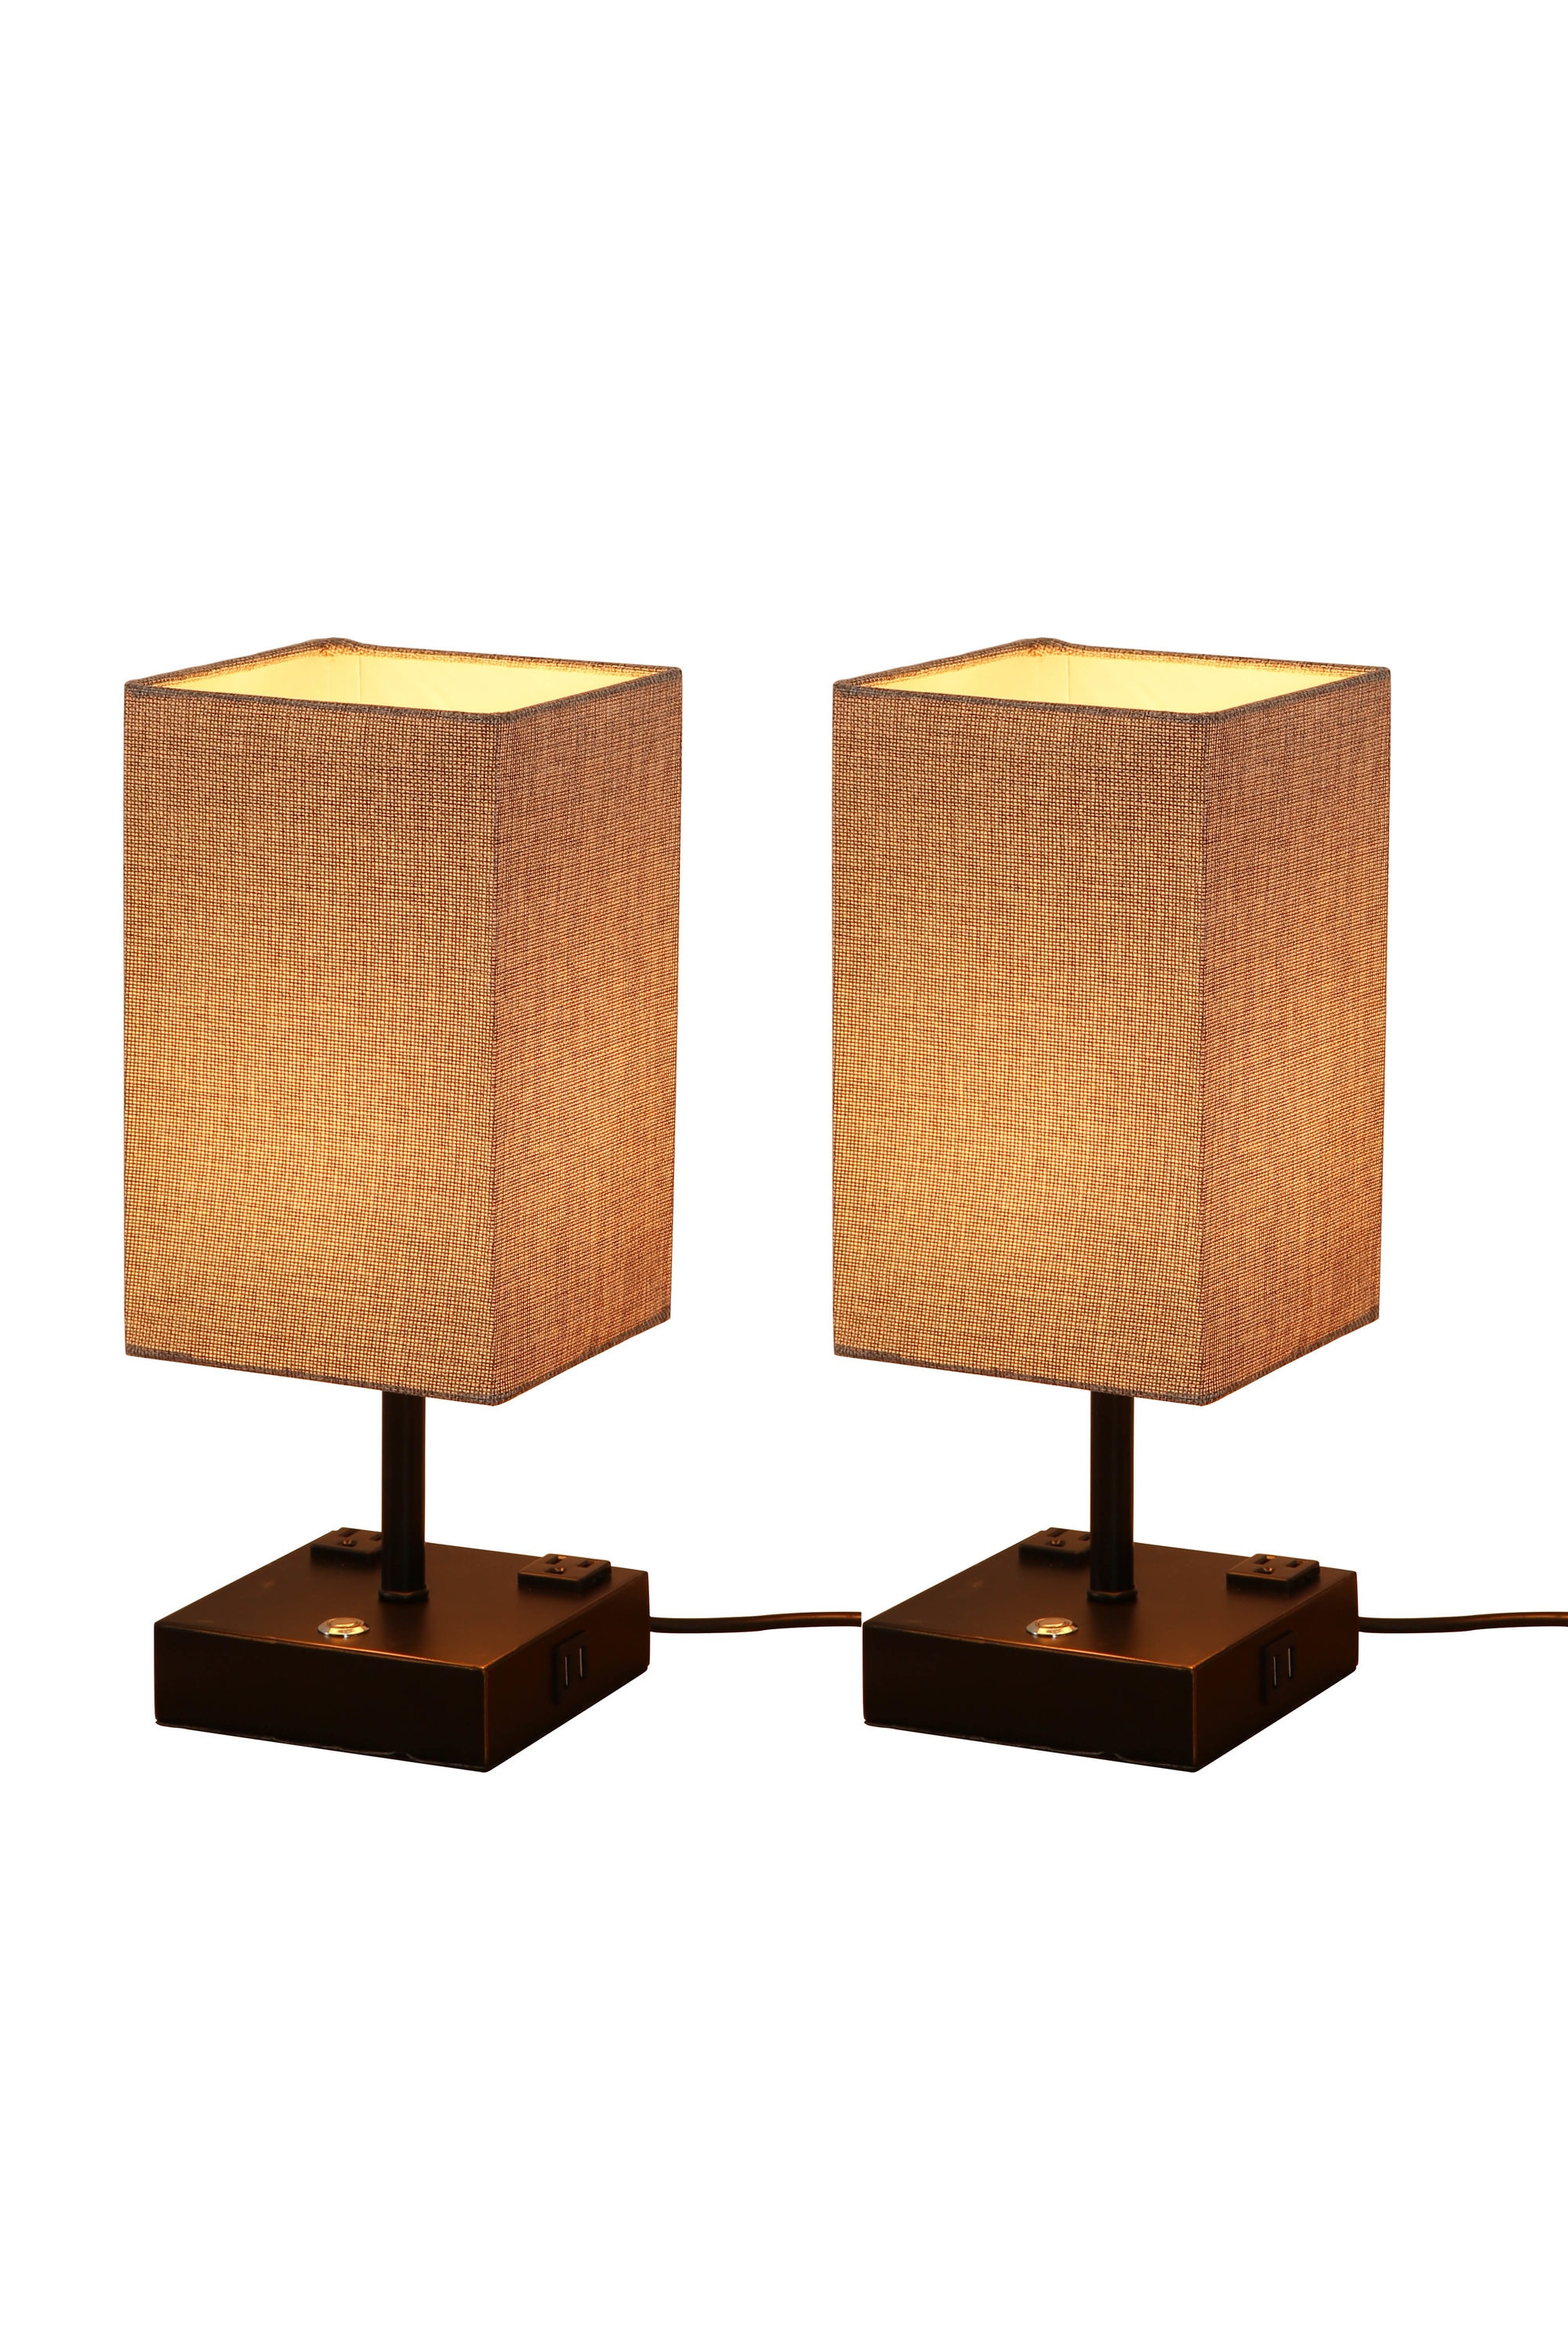 Cedar Hill Table lamp with USB charge port and AC outlets Black LED Touch  Table Lamp with Fabric Shade (Set of 2) in the Table Lamps department at